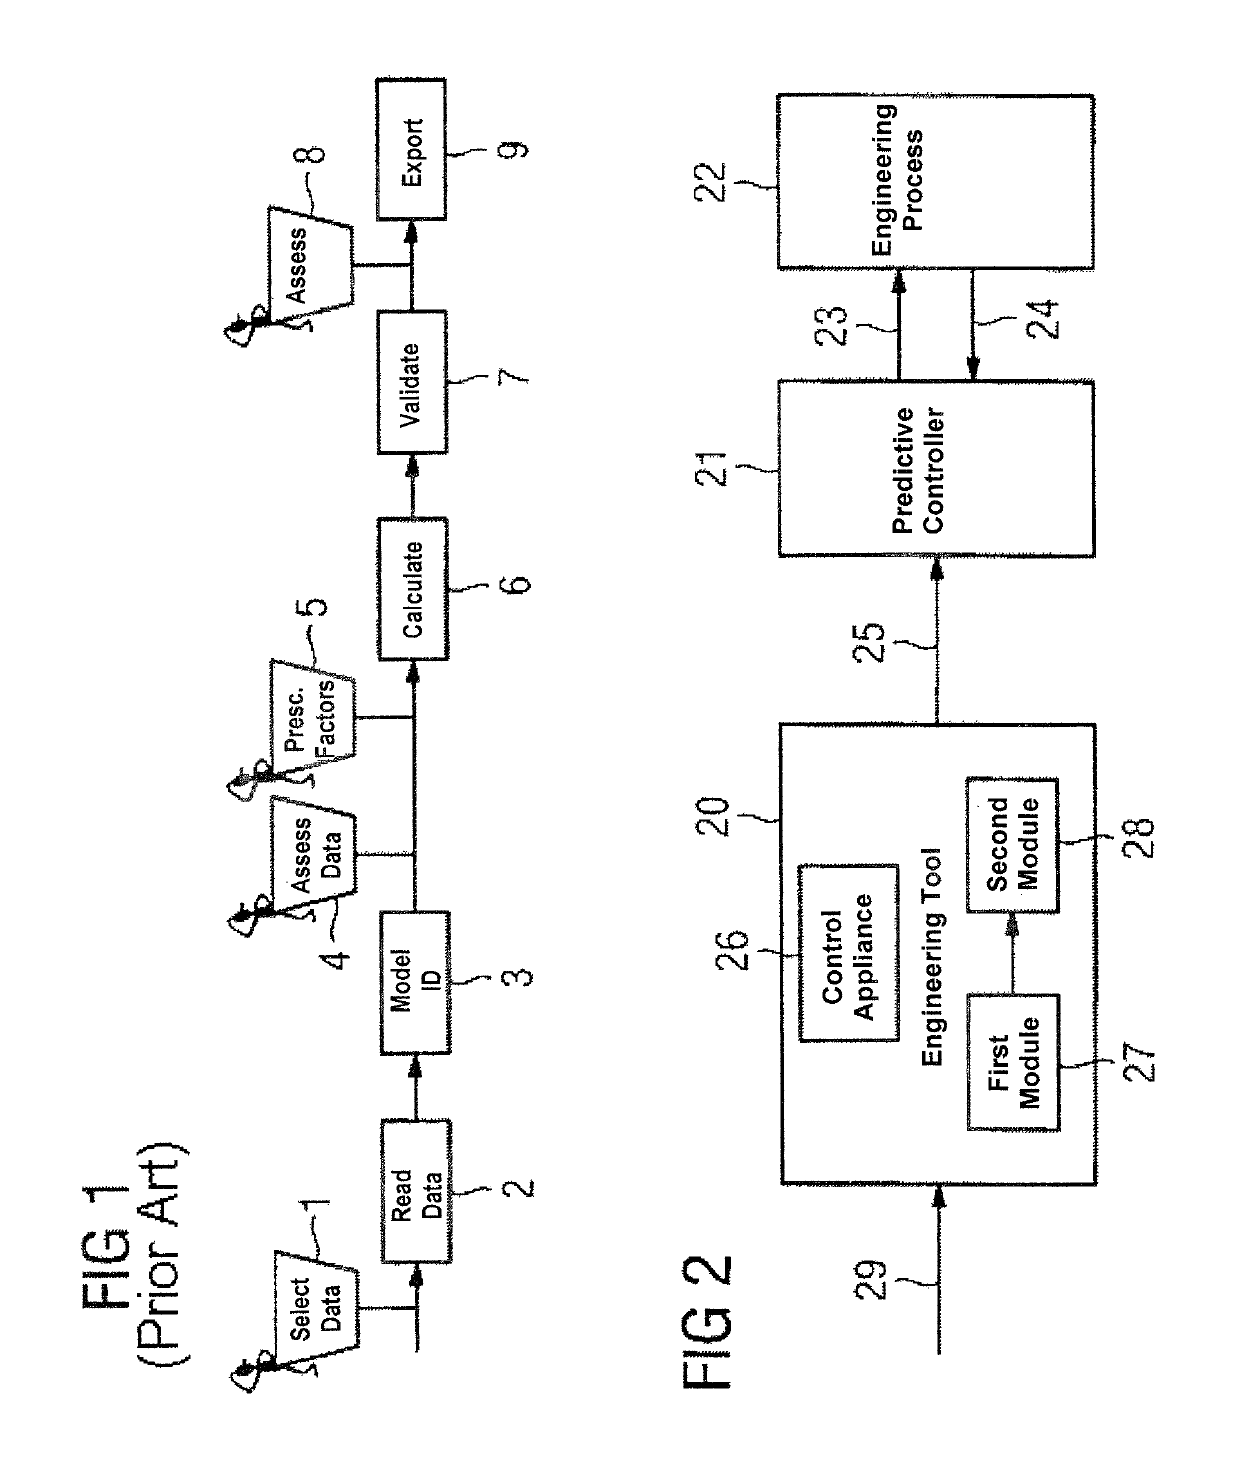 Engineering tool and method for parameterizing a model-based predictive controller